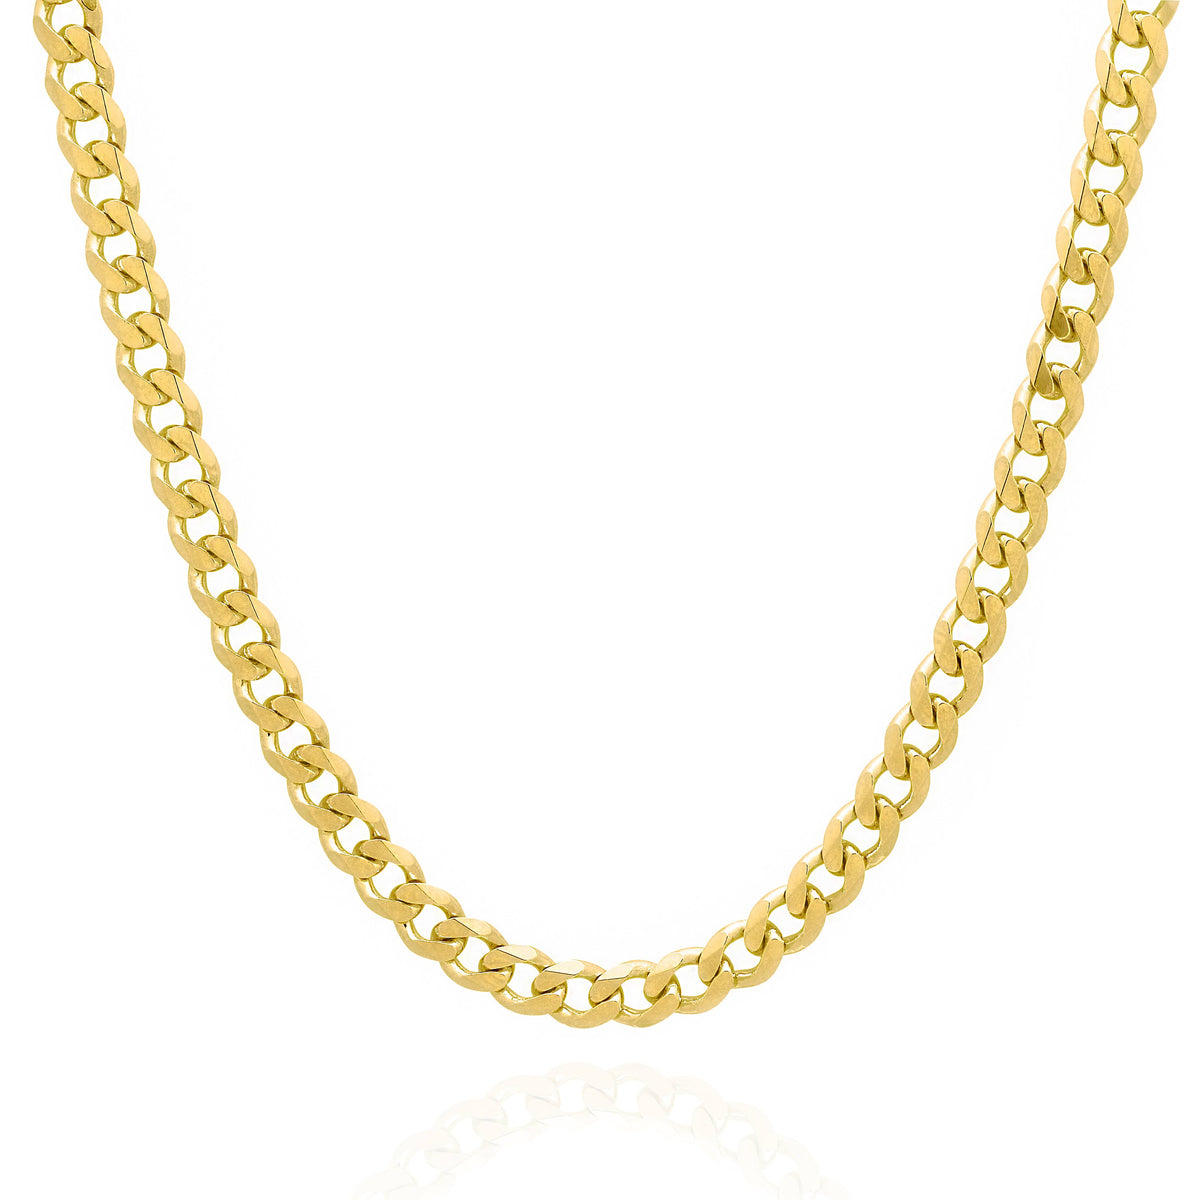 Solid 10KT Yellow Gold Curb Style Chain